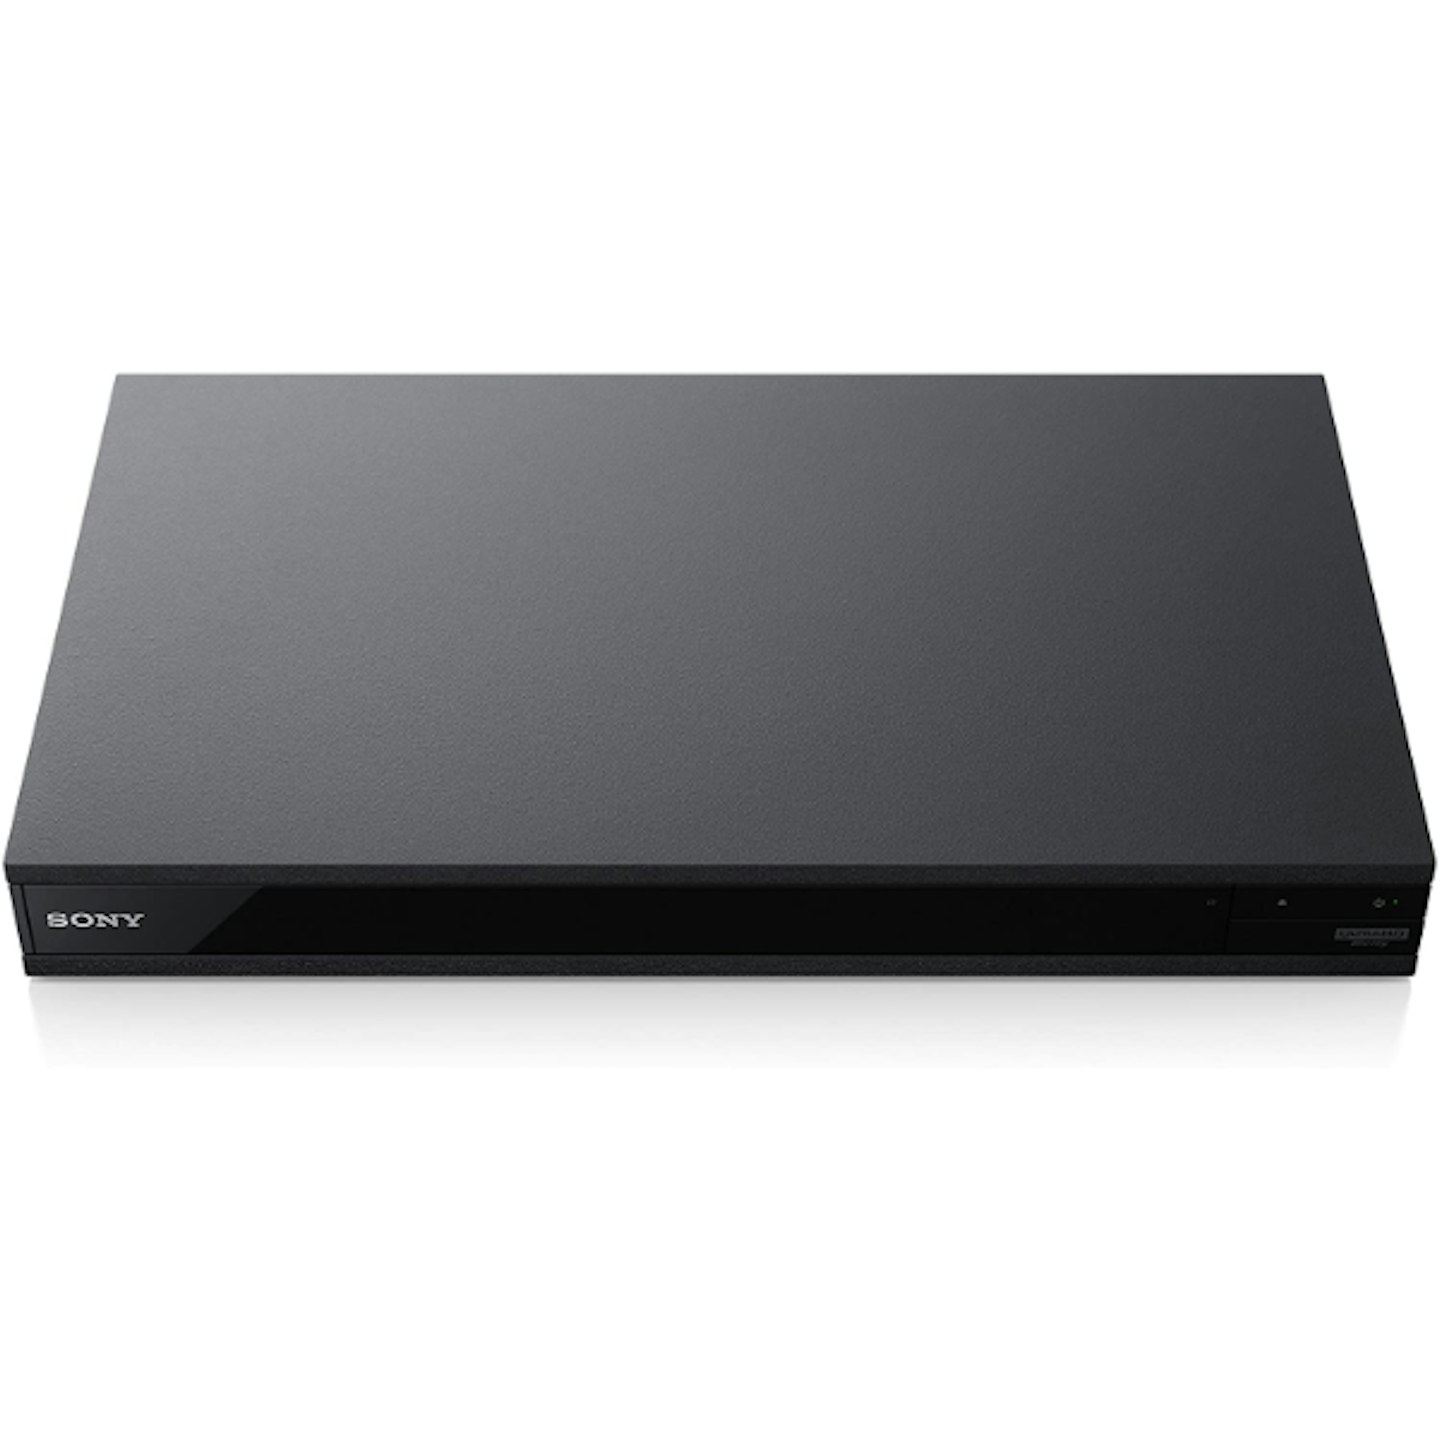 Sony UBP-X800 4K Ultra HD Blu-Ray Disc Player with High-Resolution Audio